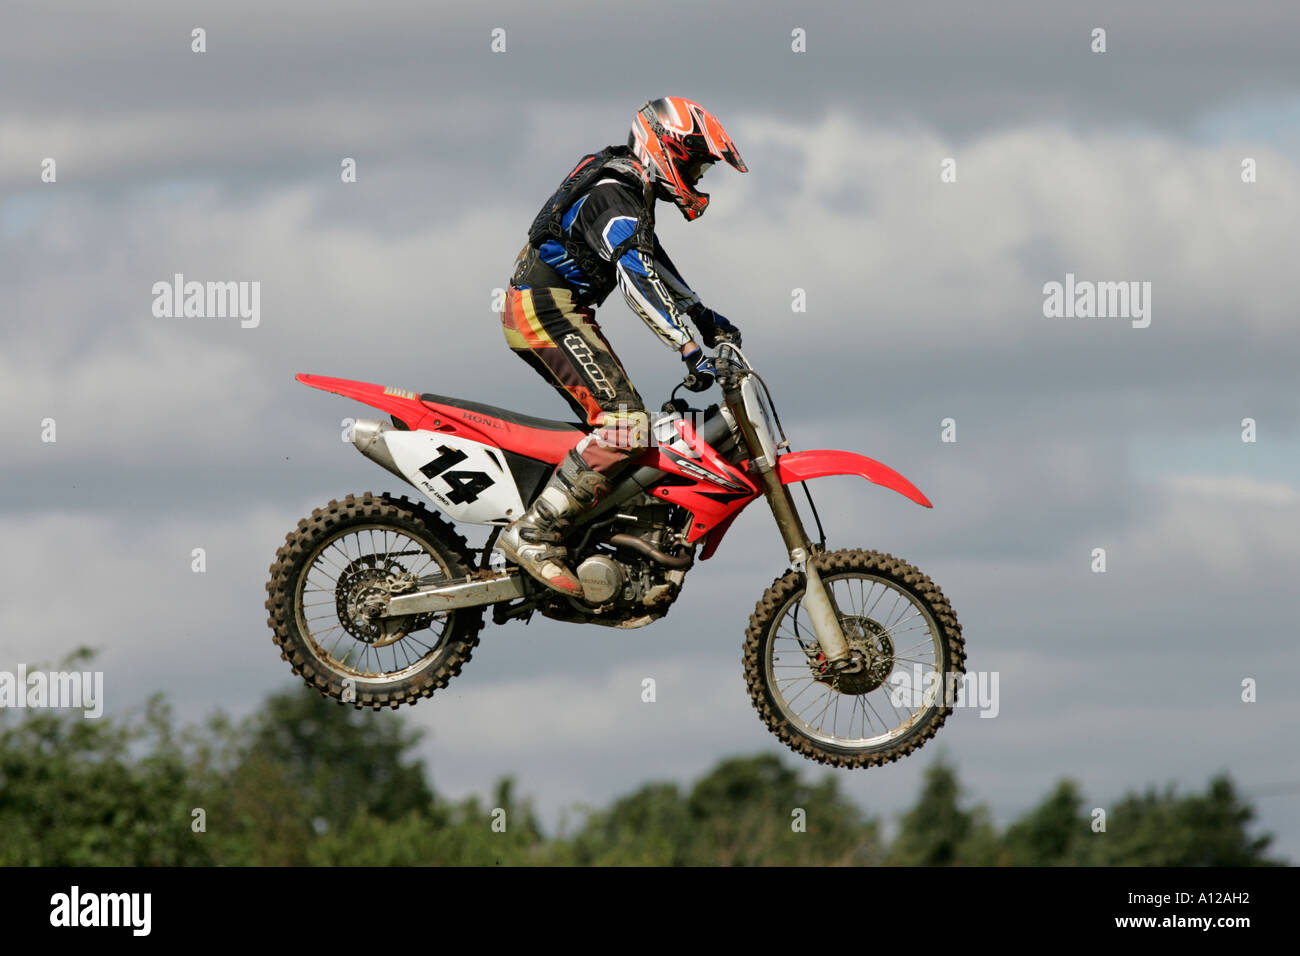 Philip Loughlin 14 jumps his 450 Honda into a cloudy sky at tandragee motocross circuit county down northern ireland Stock Photo